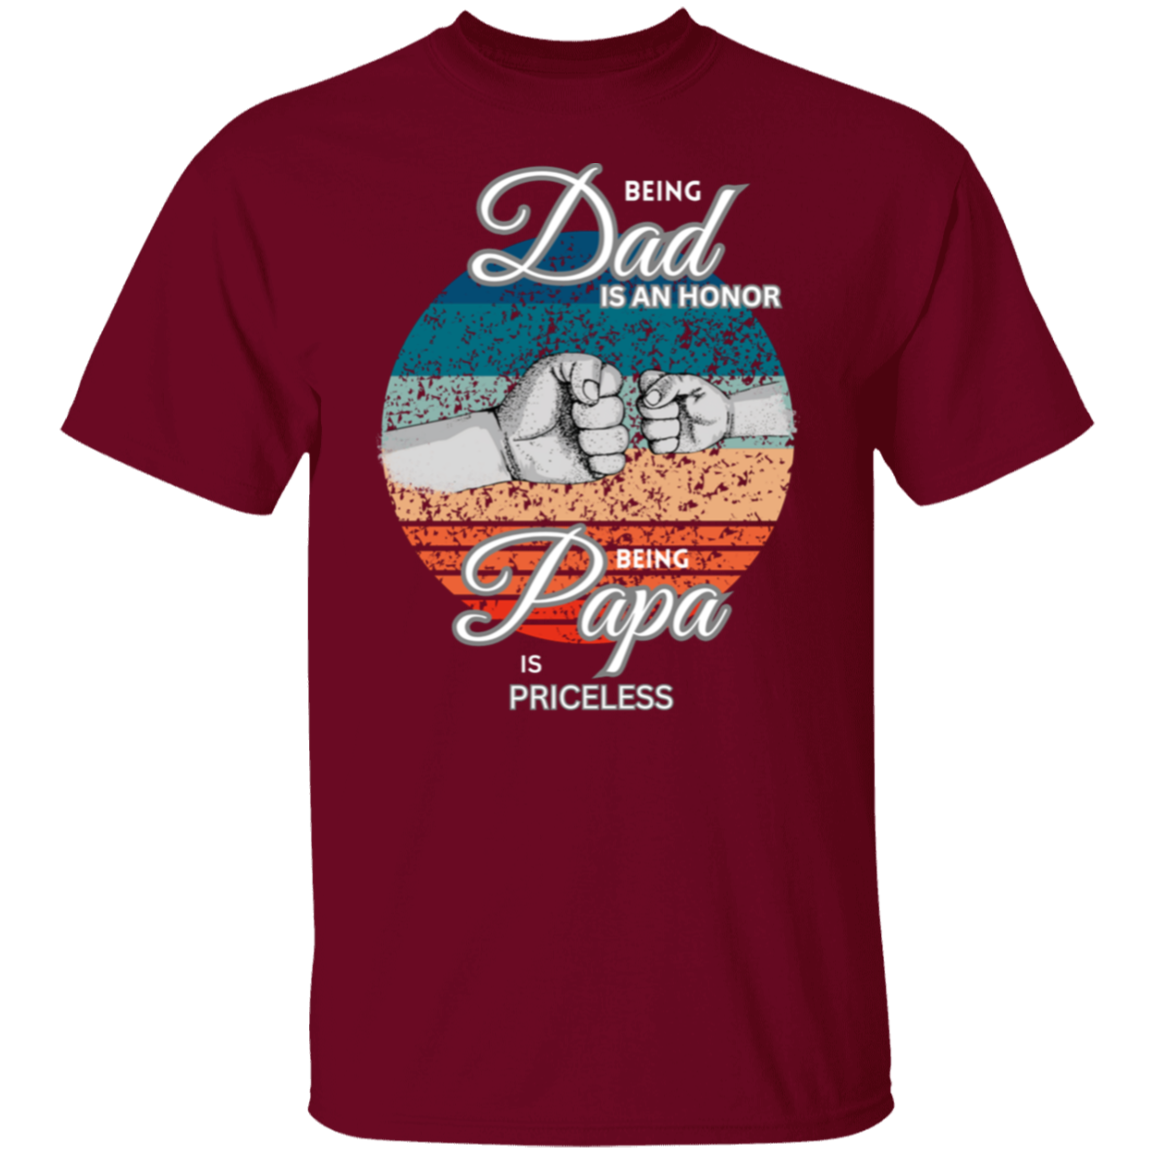 "Being Dad is an Honor" Short Sleeve T-Shirt